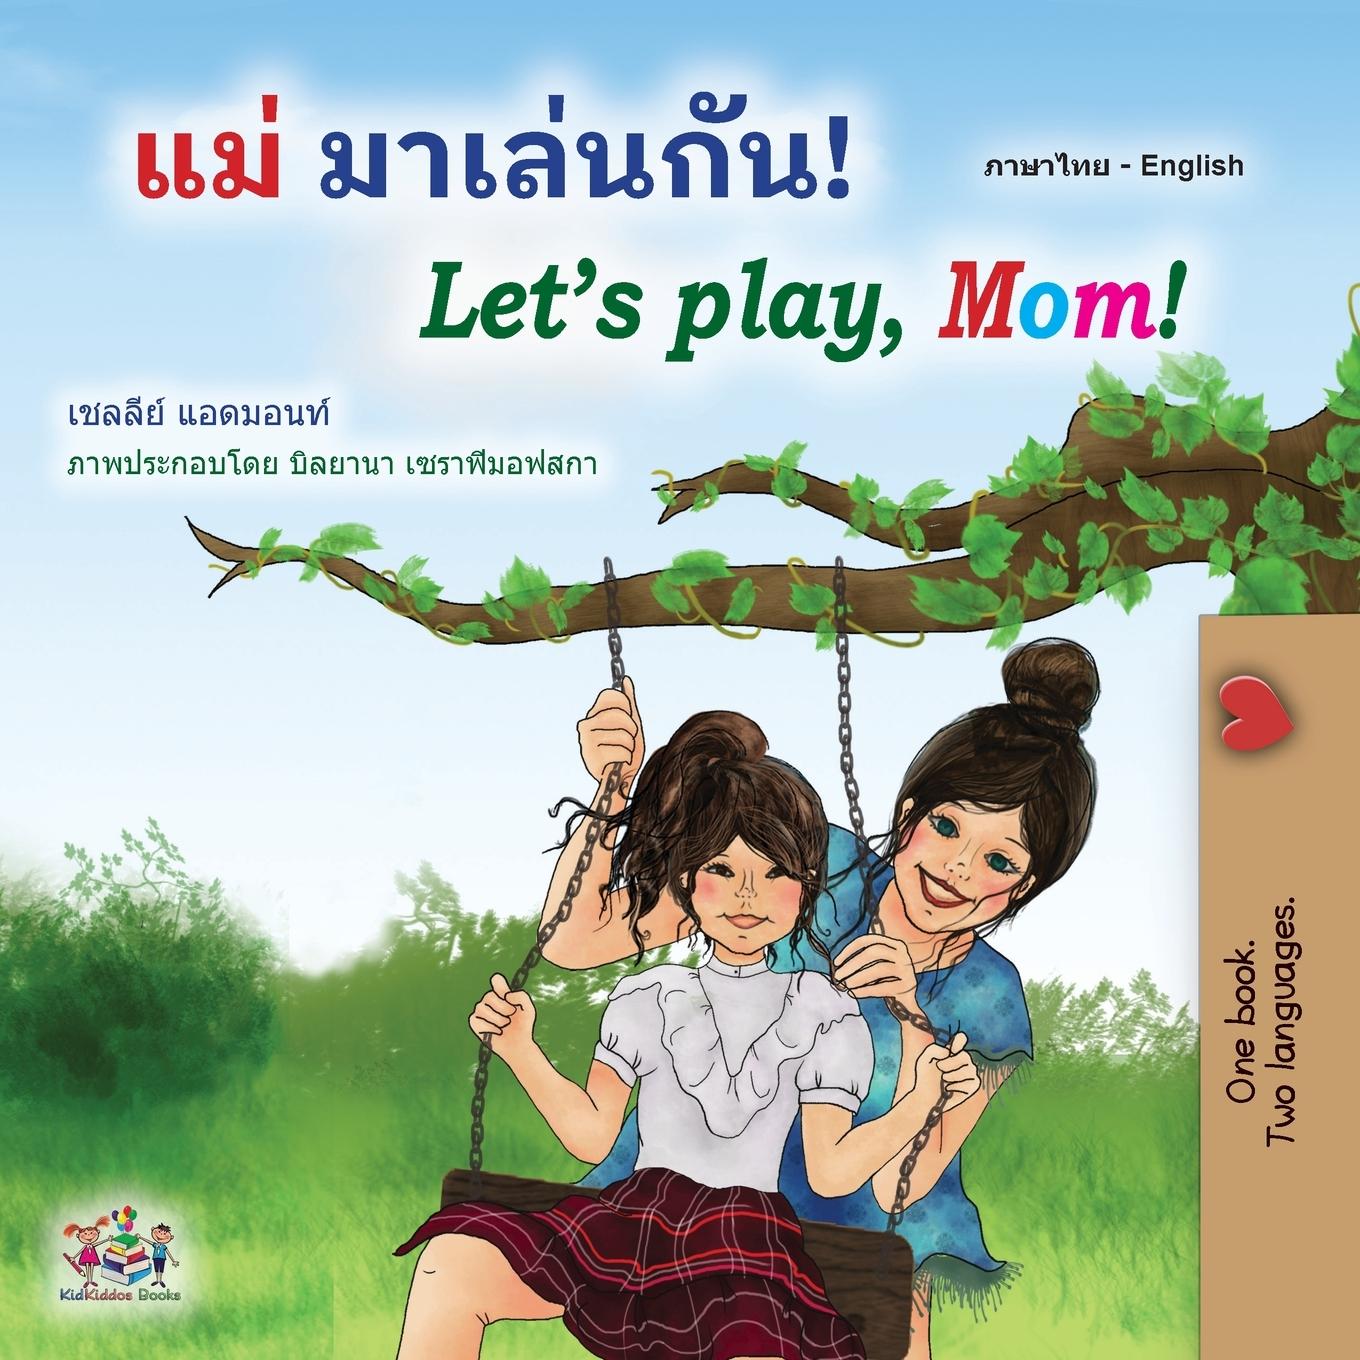 Book Let's play, Mom! (Thai English Bilingual Book for Kids) Kidkiddos Books